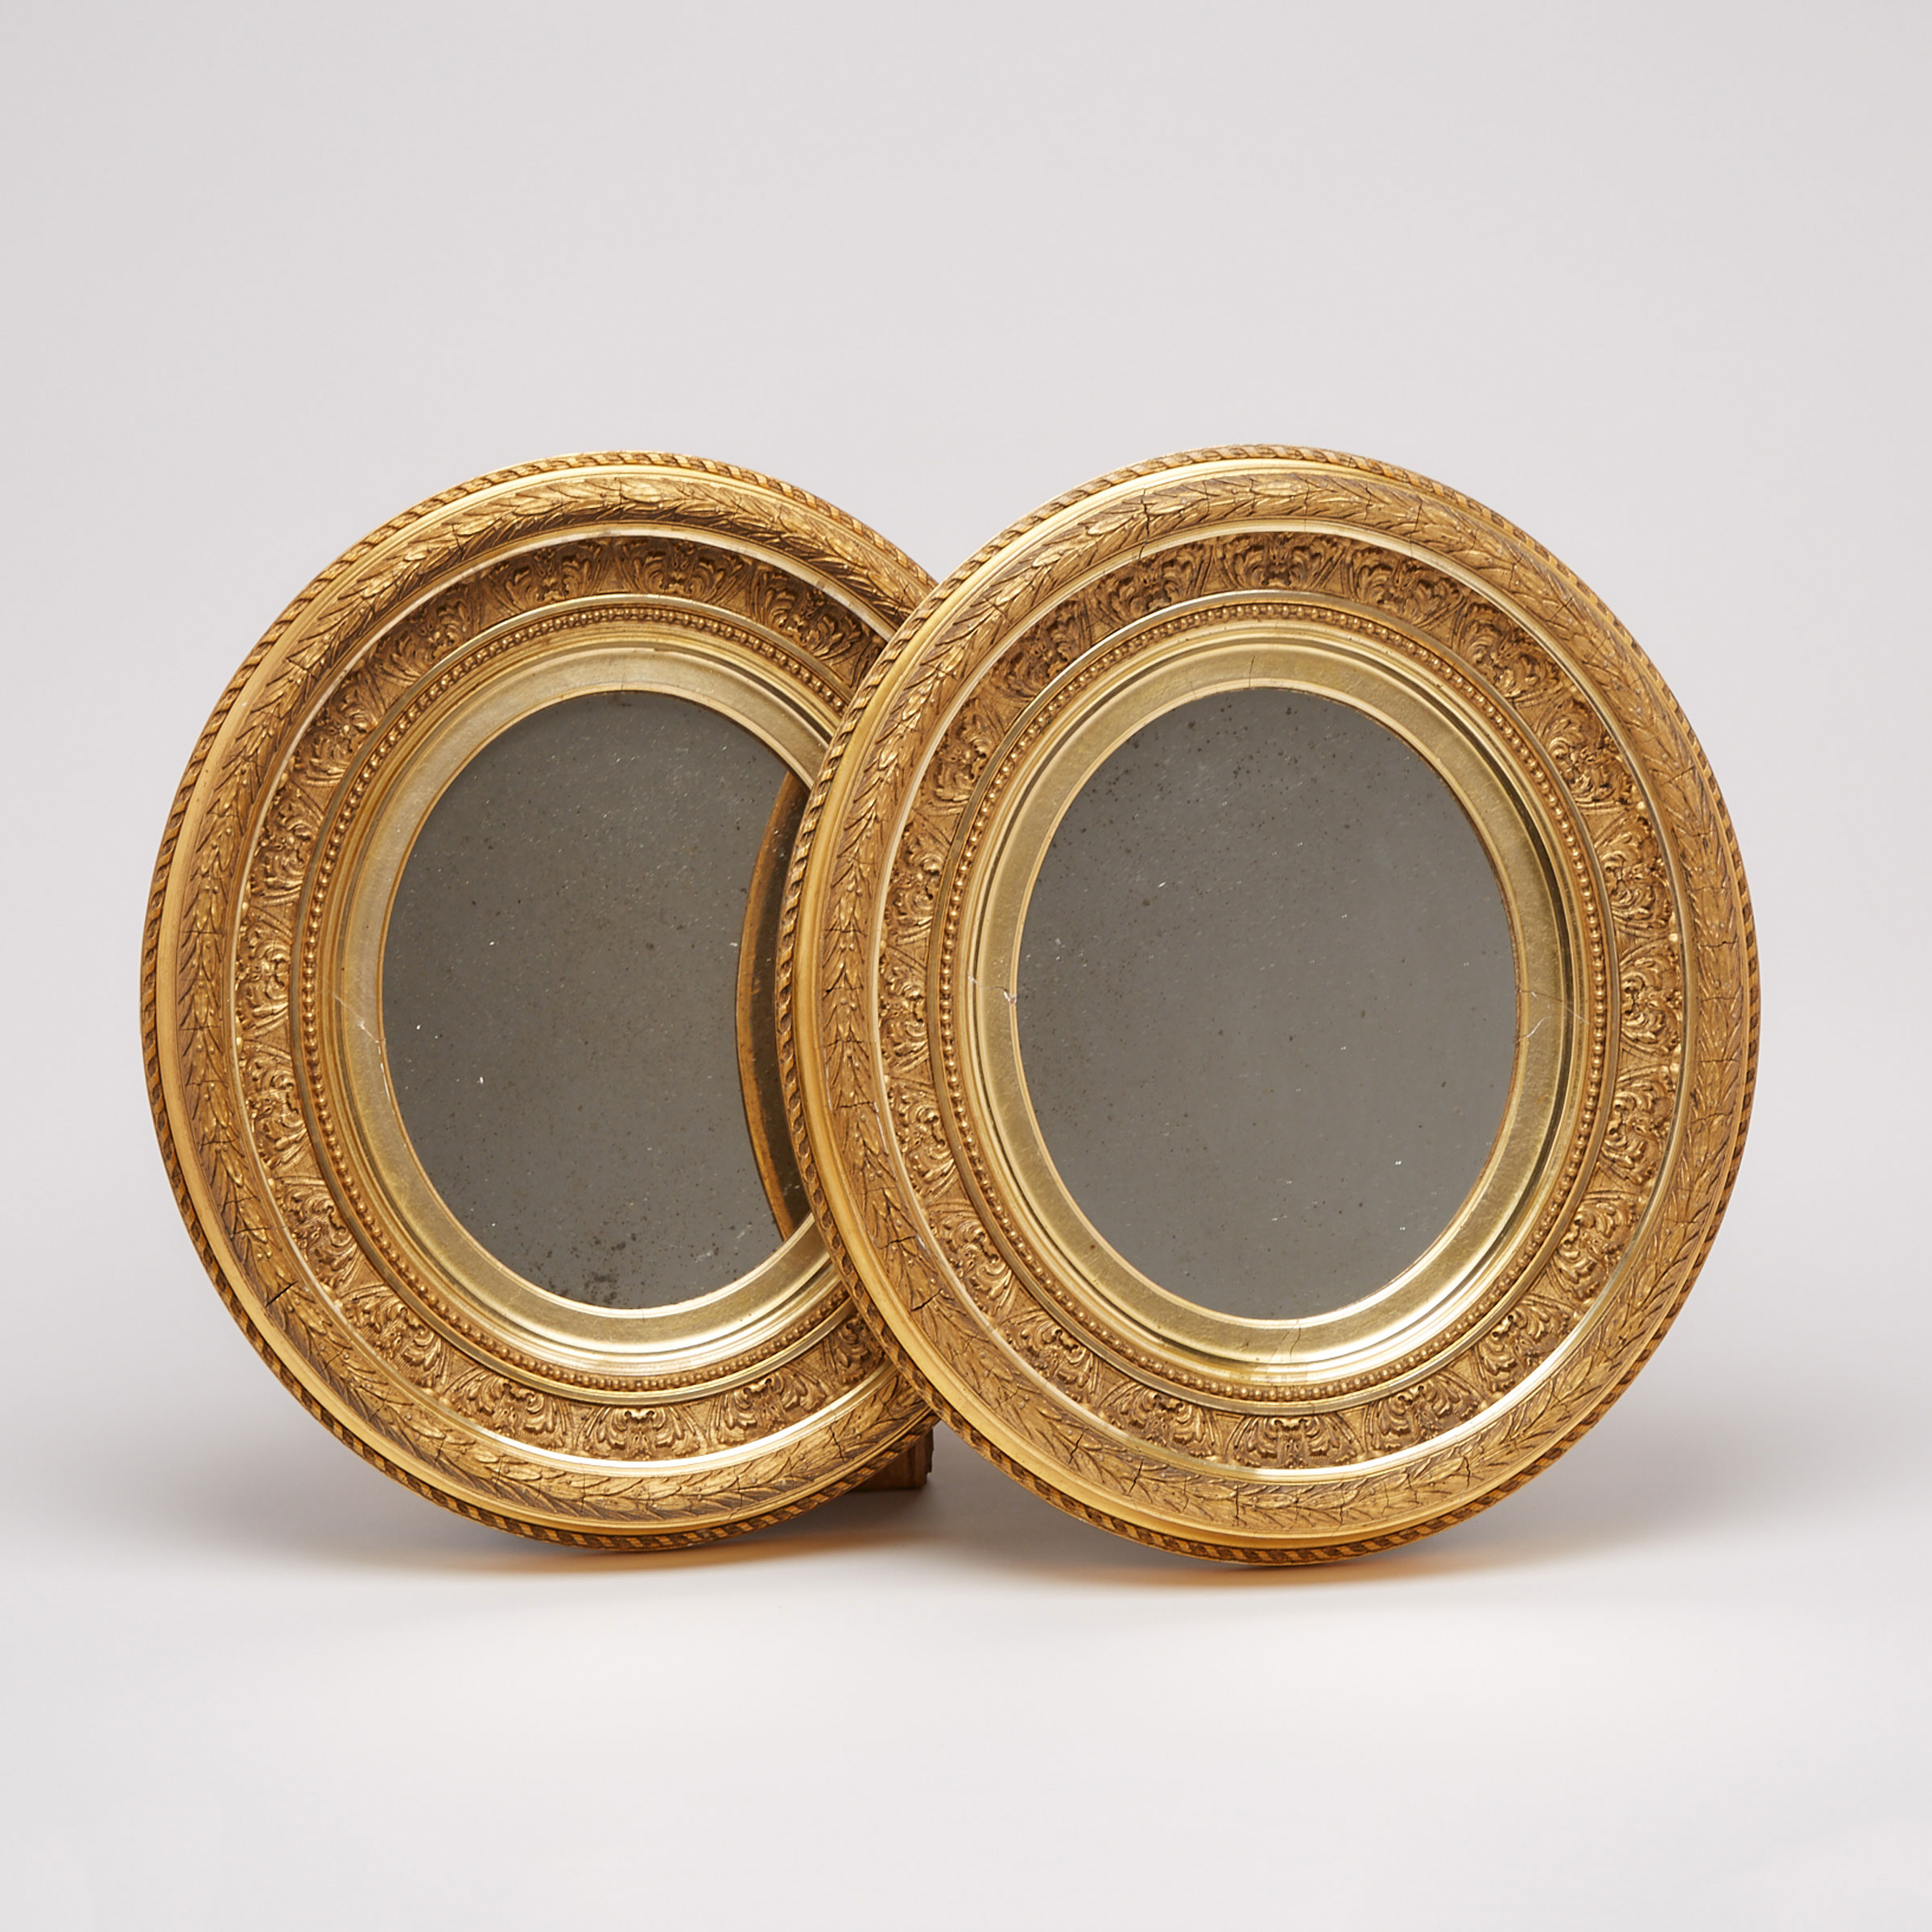 Pair of French Neoclassical Oval GIlt Gesso Girandol Mirrors, 19th century